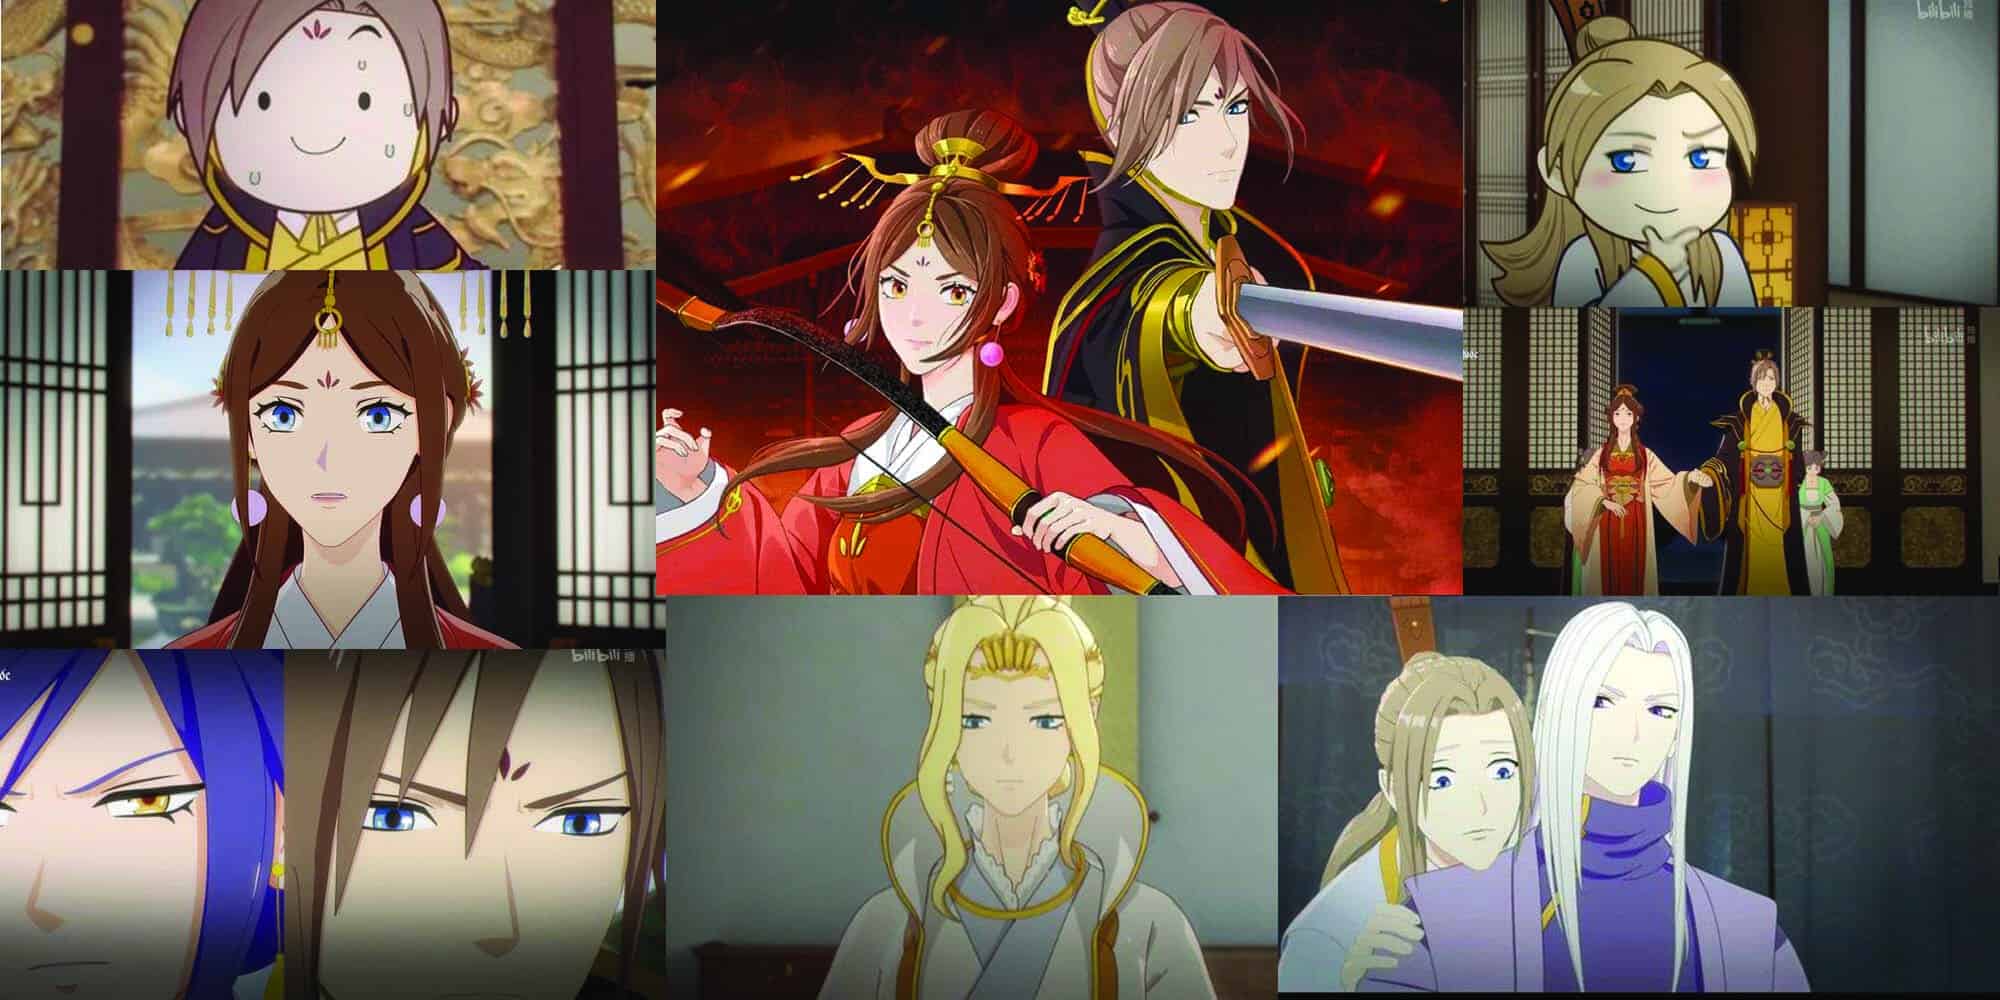 Liang Bu Yi Season 2 (No Doubt In Us) Anime Had Been Revealed By